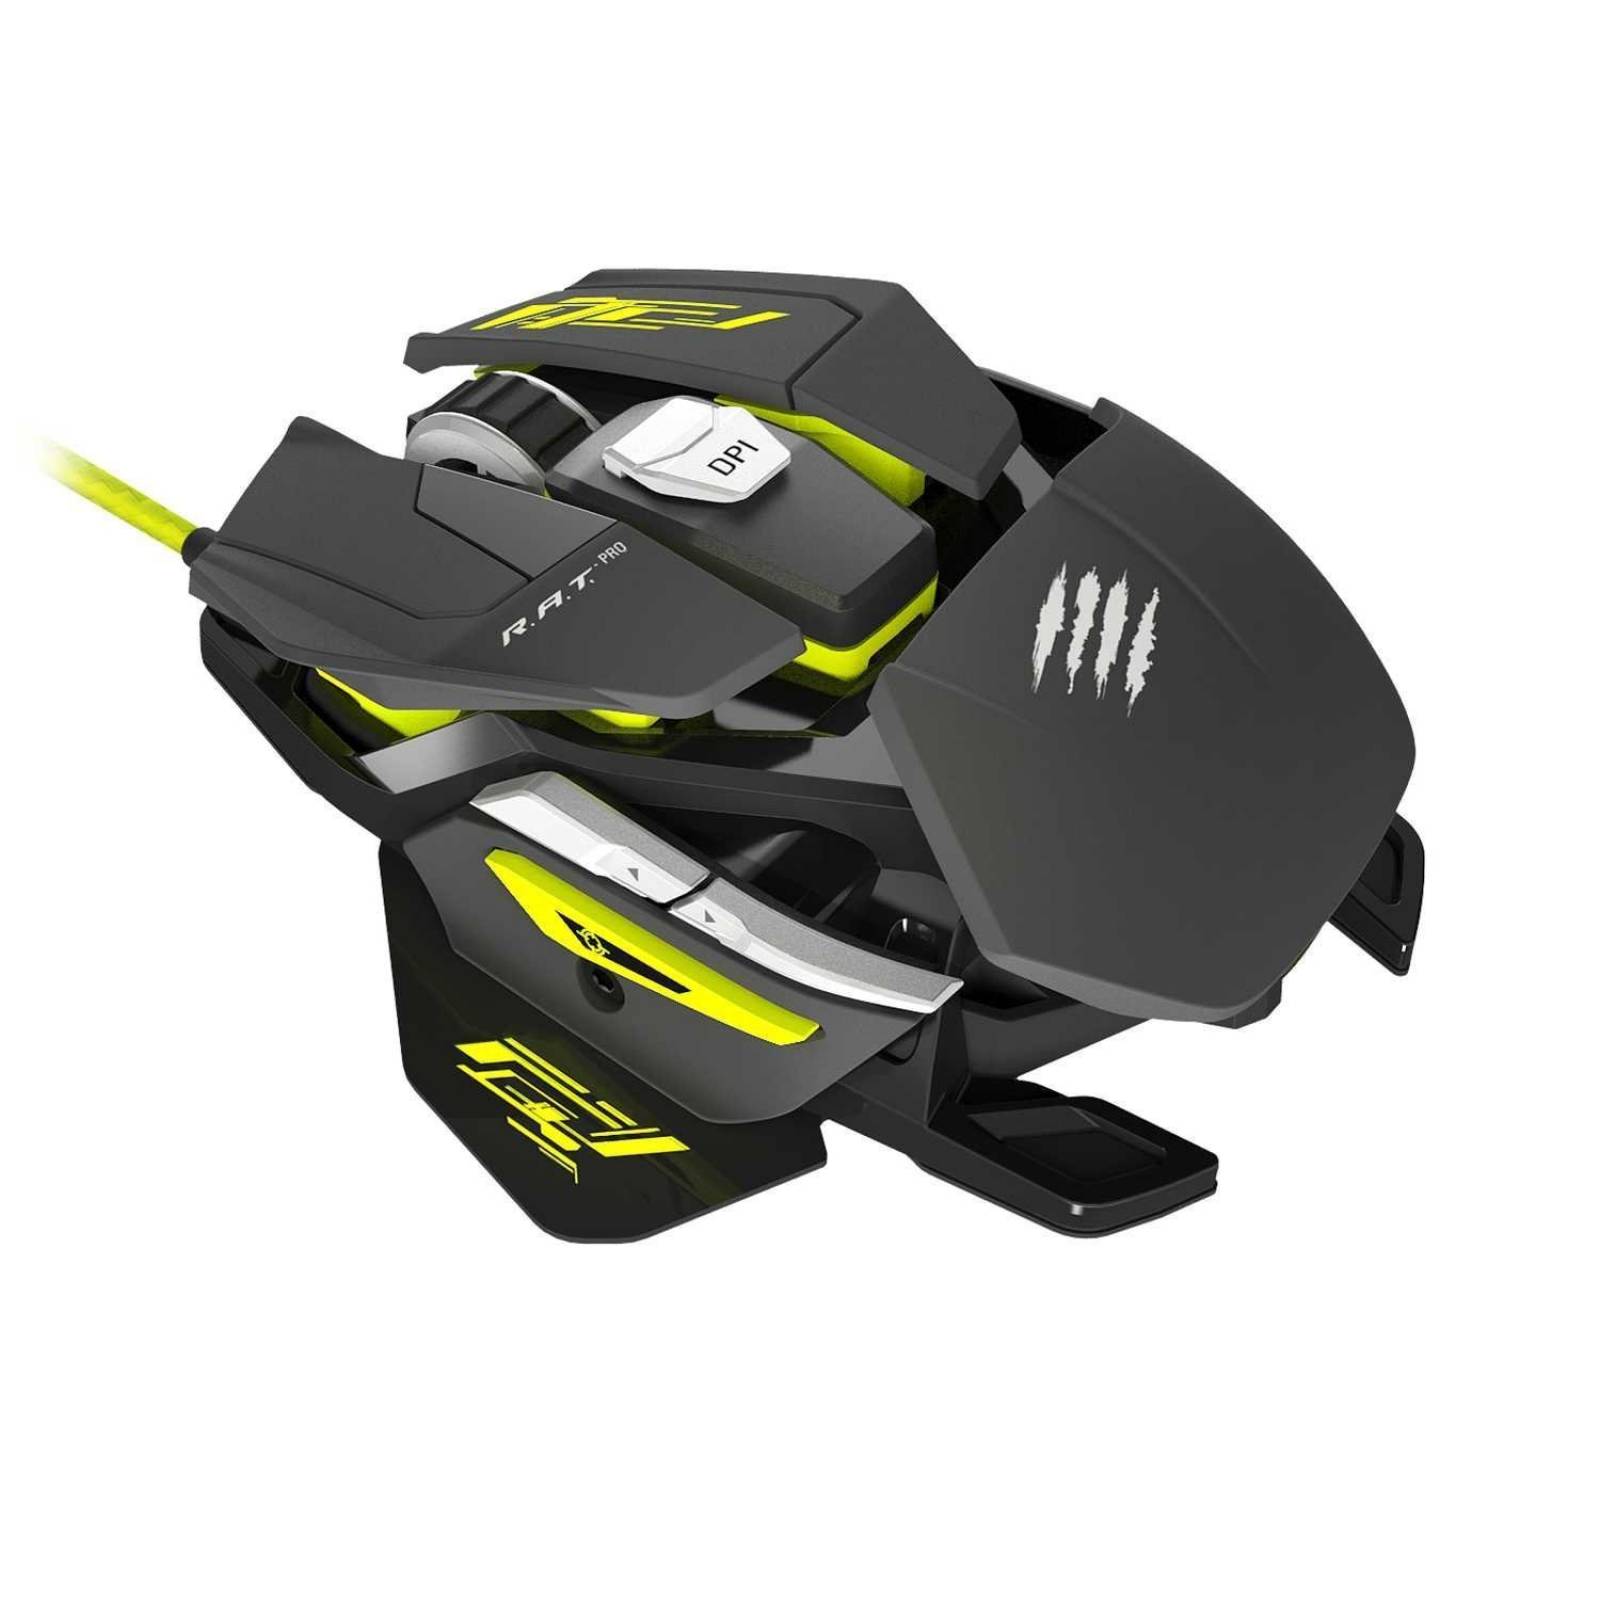 Mad Catz R.A.T. PRO S Gaming Mouse para PC (MCB4372200A6/04/